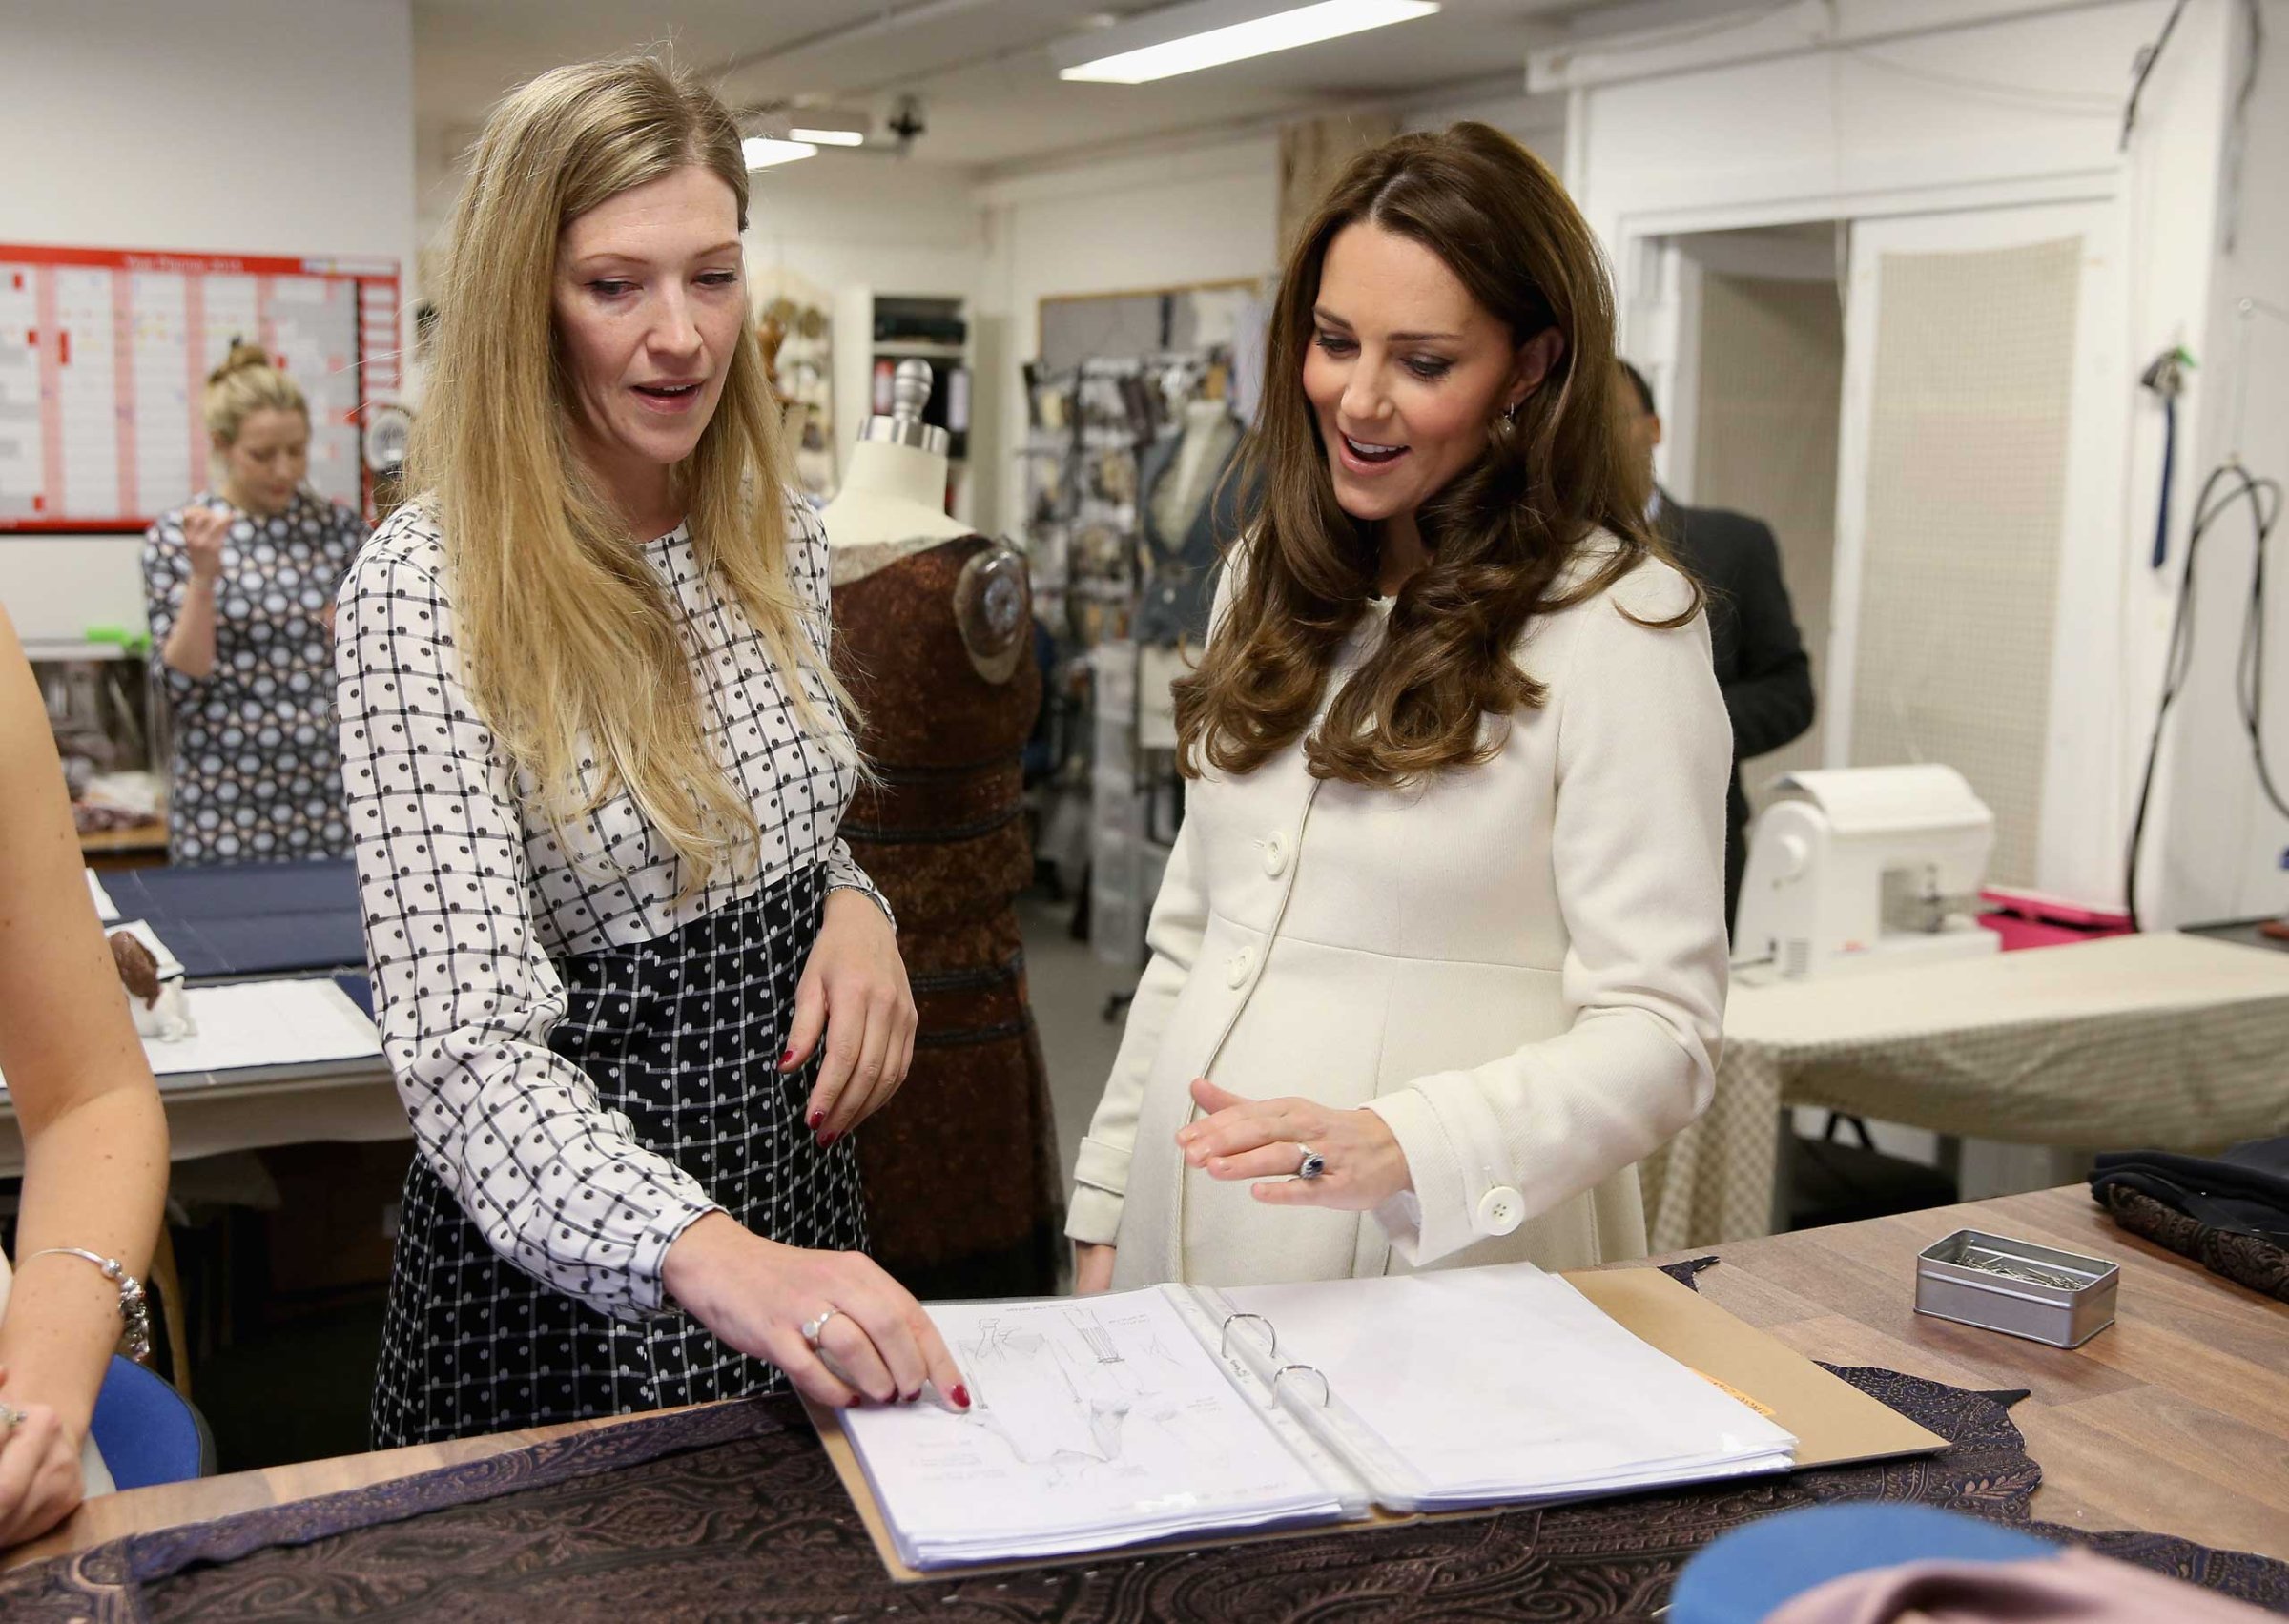 Catherine, Duchess of Cambridge is shown consumes during an official visit to the set of Downton Abbey at Ealing Studios on March 12, 2015 in London, England.